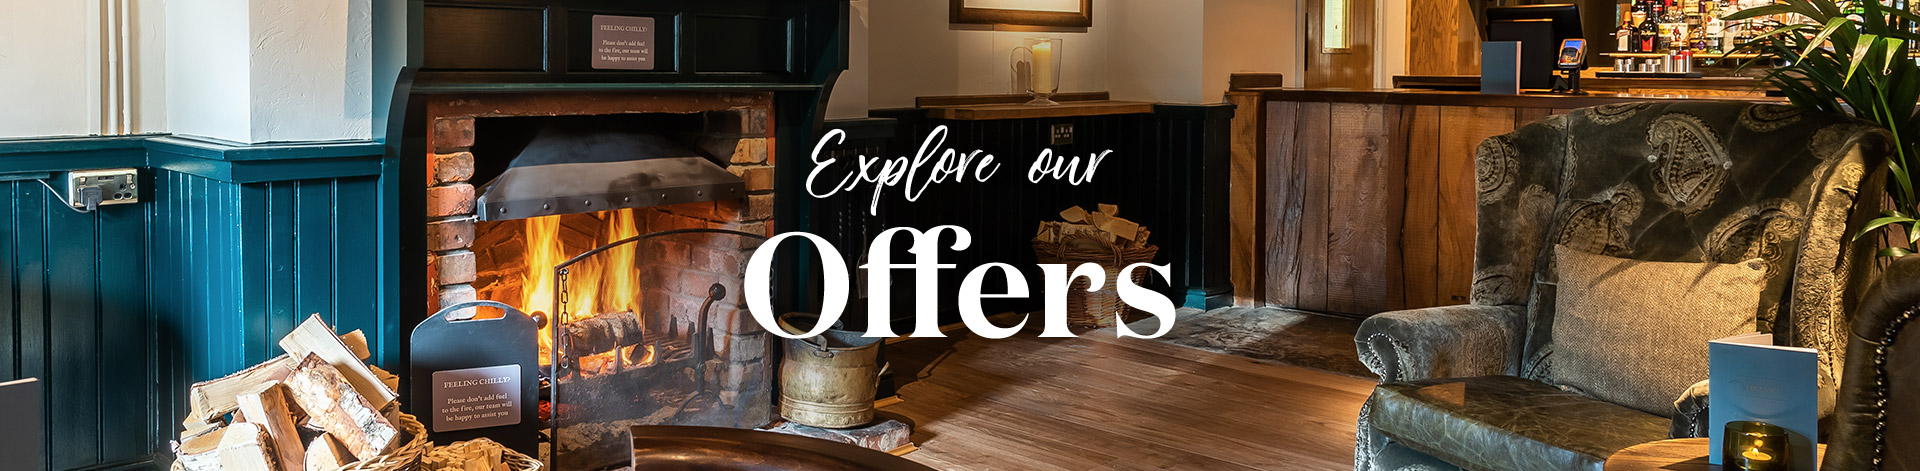 Our latest offers at The Castle